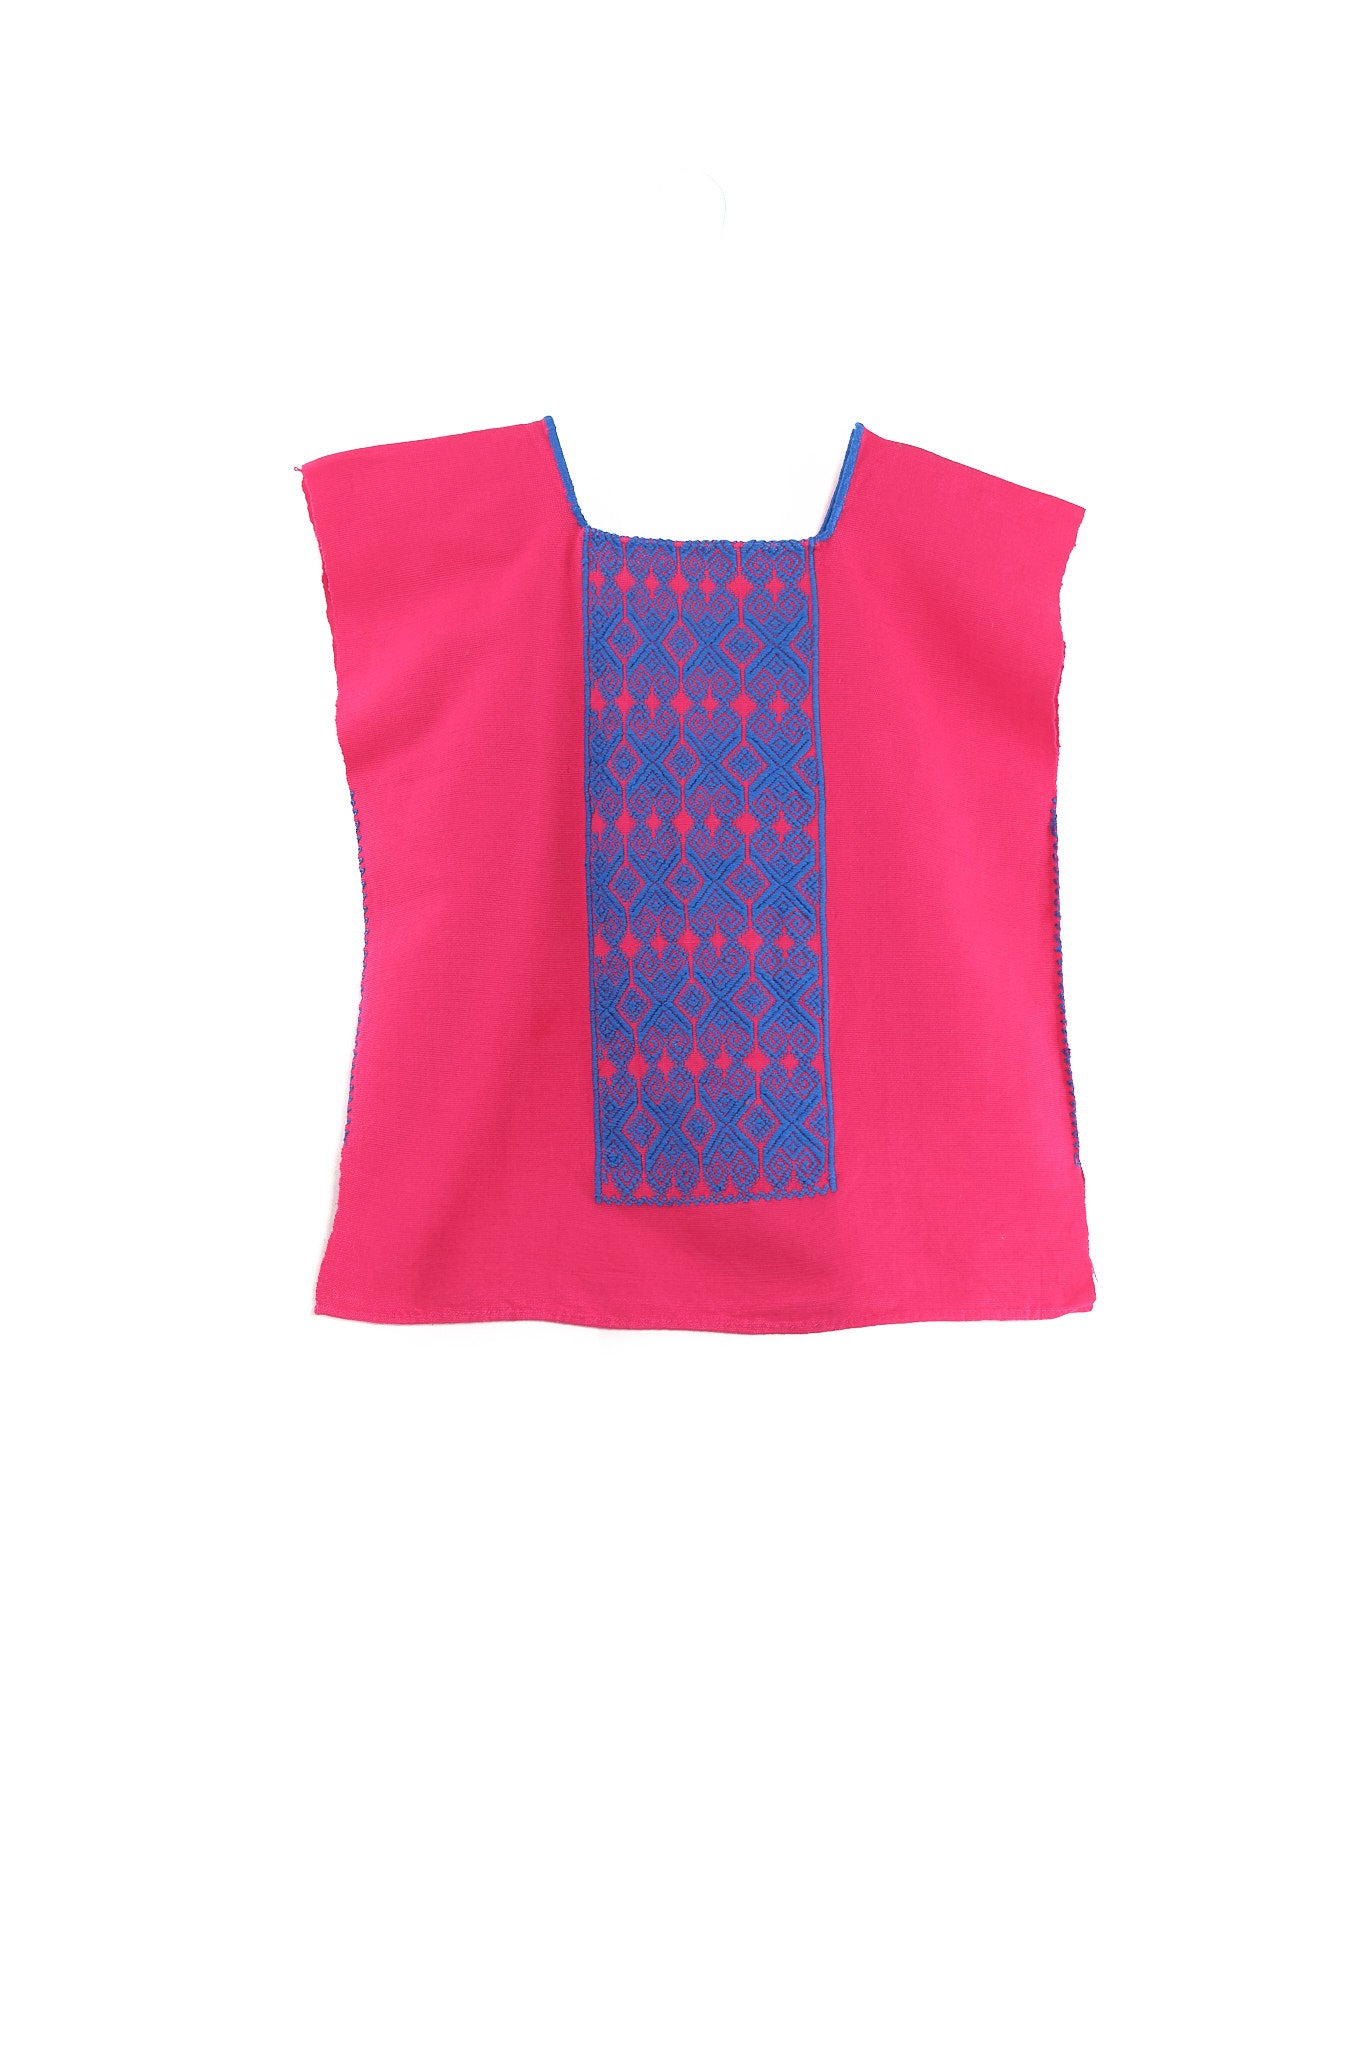 Ofelia Blouse pink with blue embroidery garment